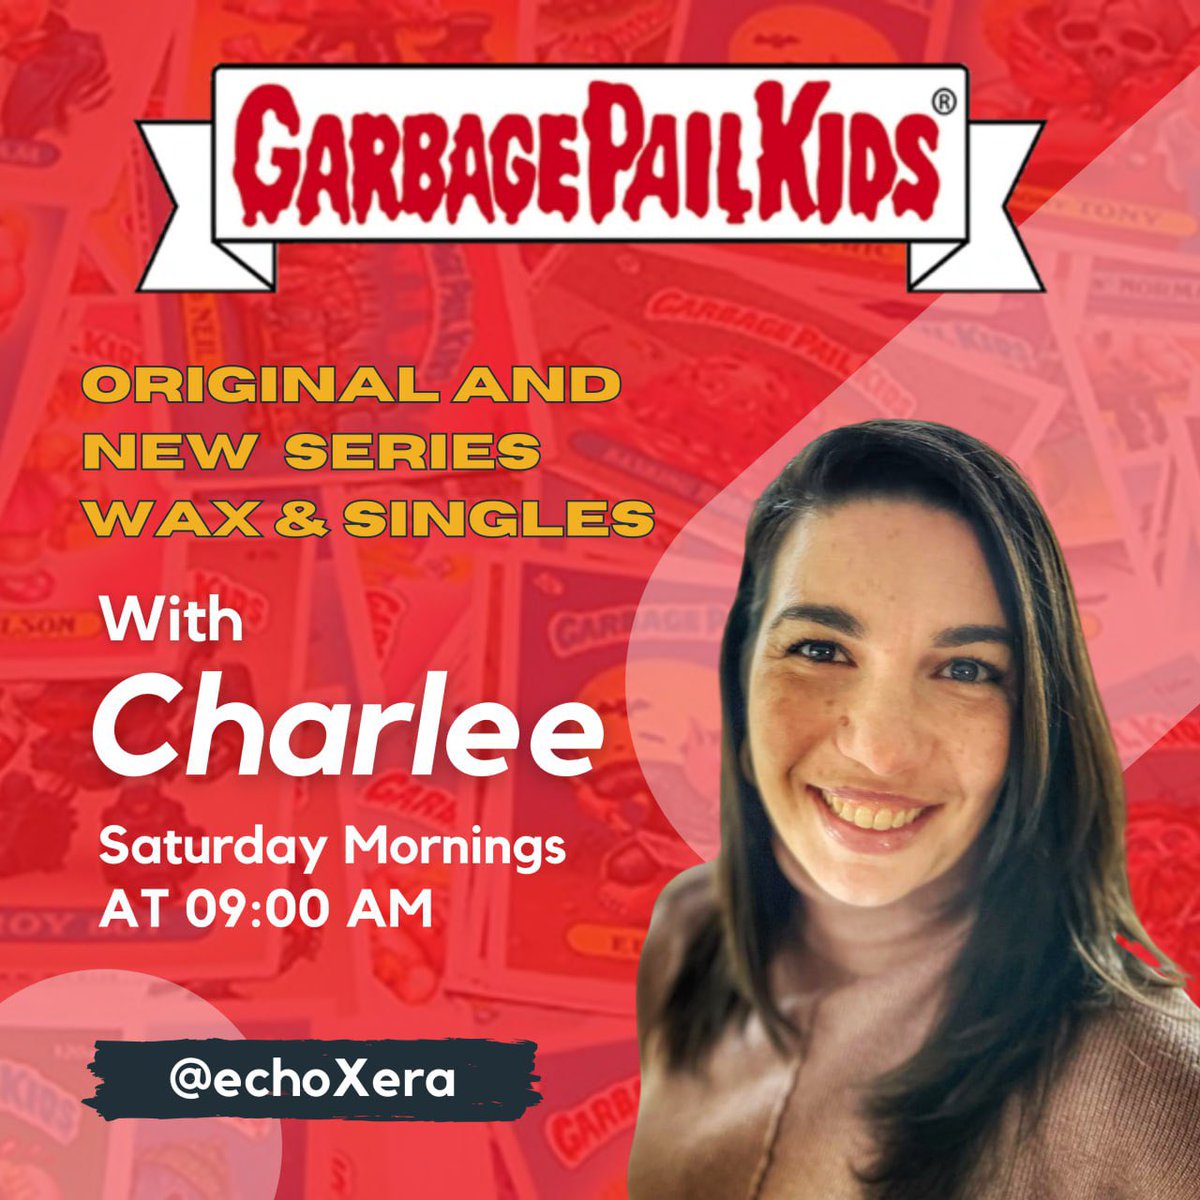 Today is the day! Join me live on @Whatnot beginning at 9am (EST) to get a chance to grab some of the most incredible  #GarbagePailKids available!